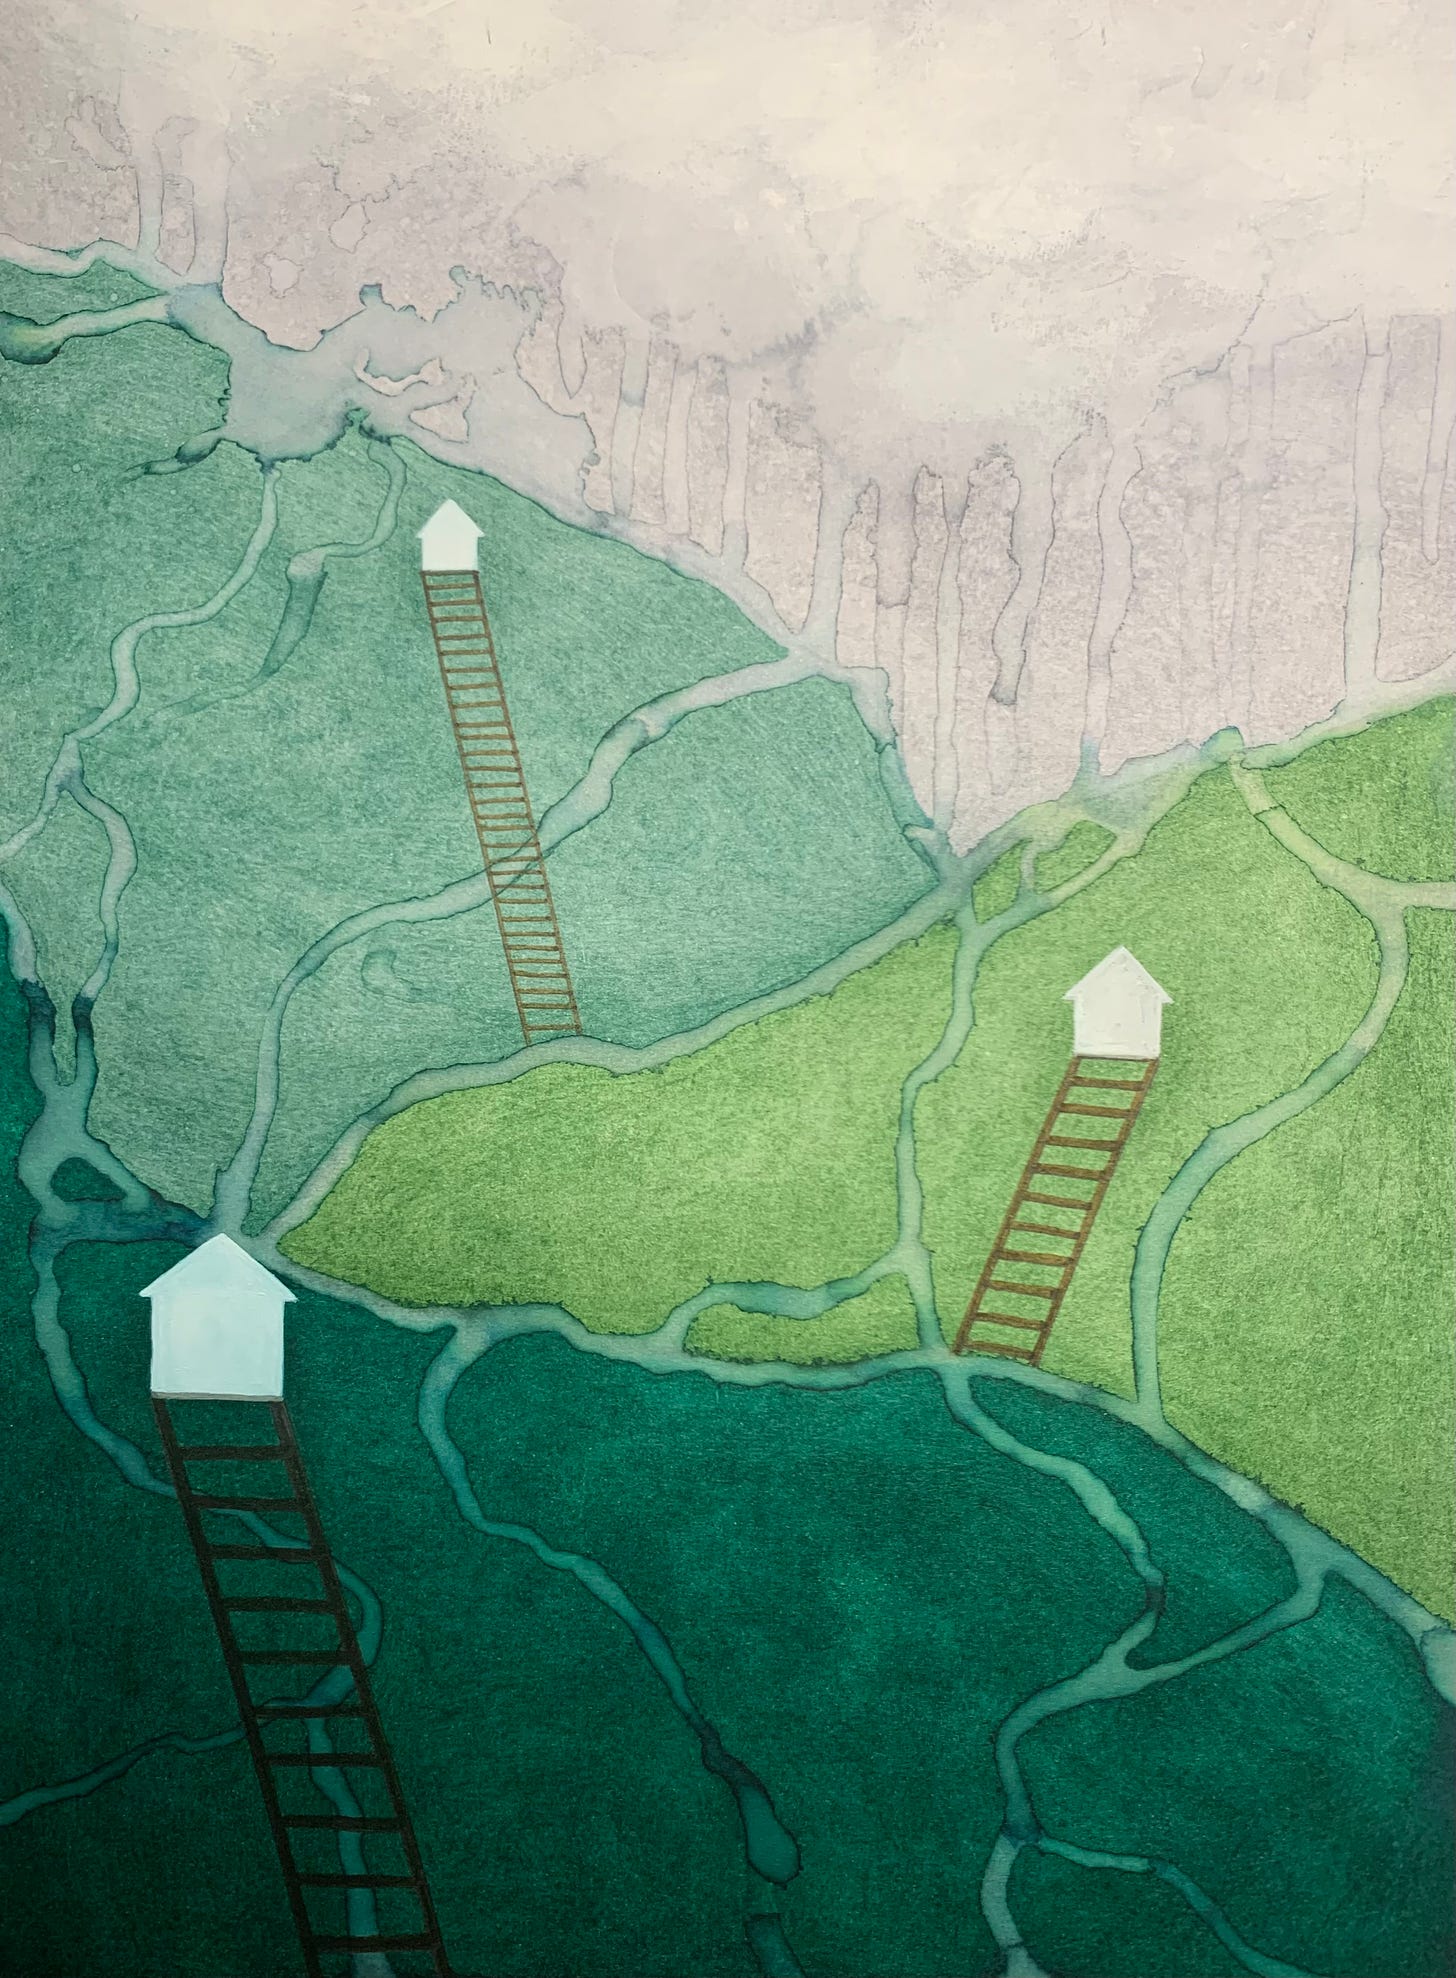 Three houses, each on its own green hill, with a tall white ladder leading to each house. Clouds drip onto the hills with a watercolour effect.